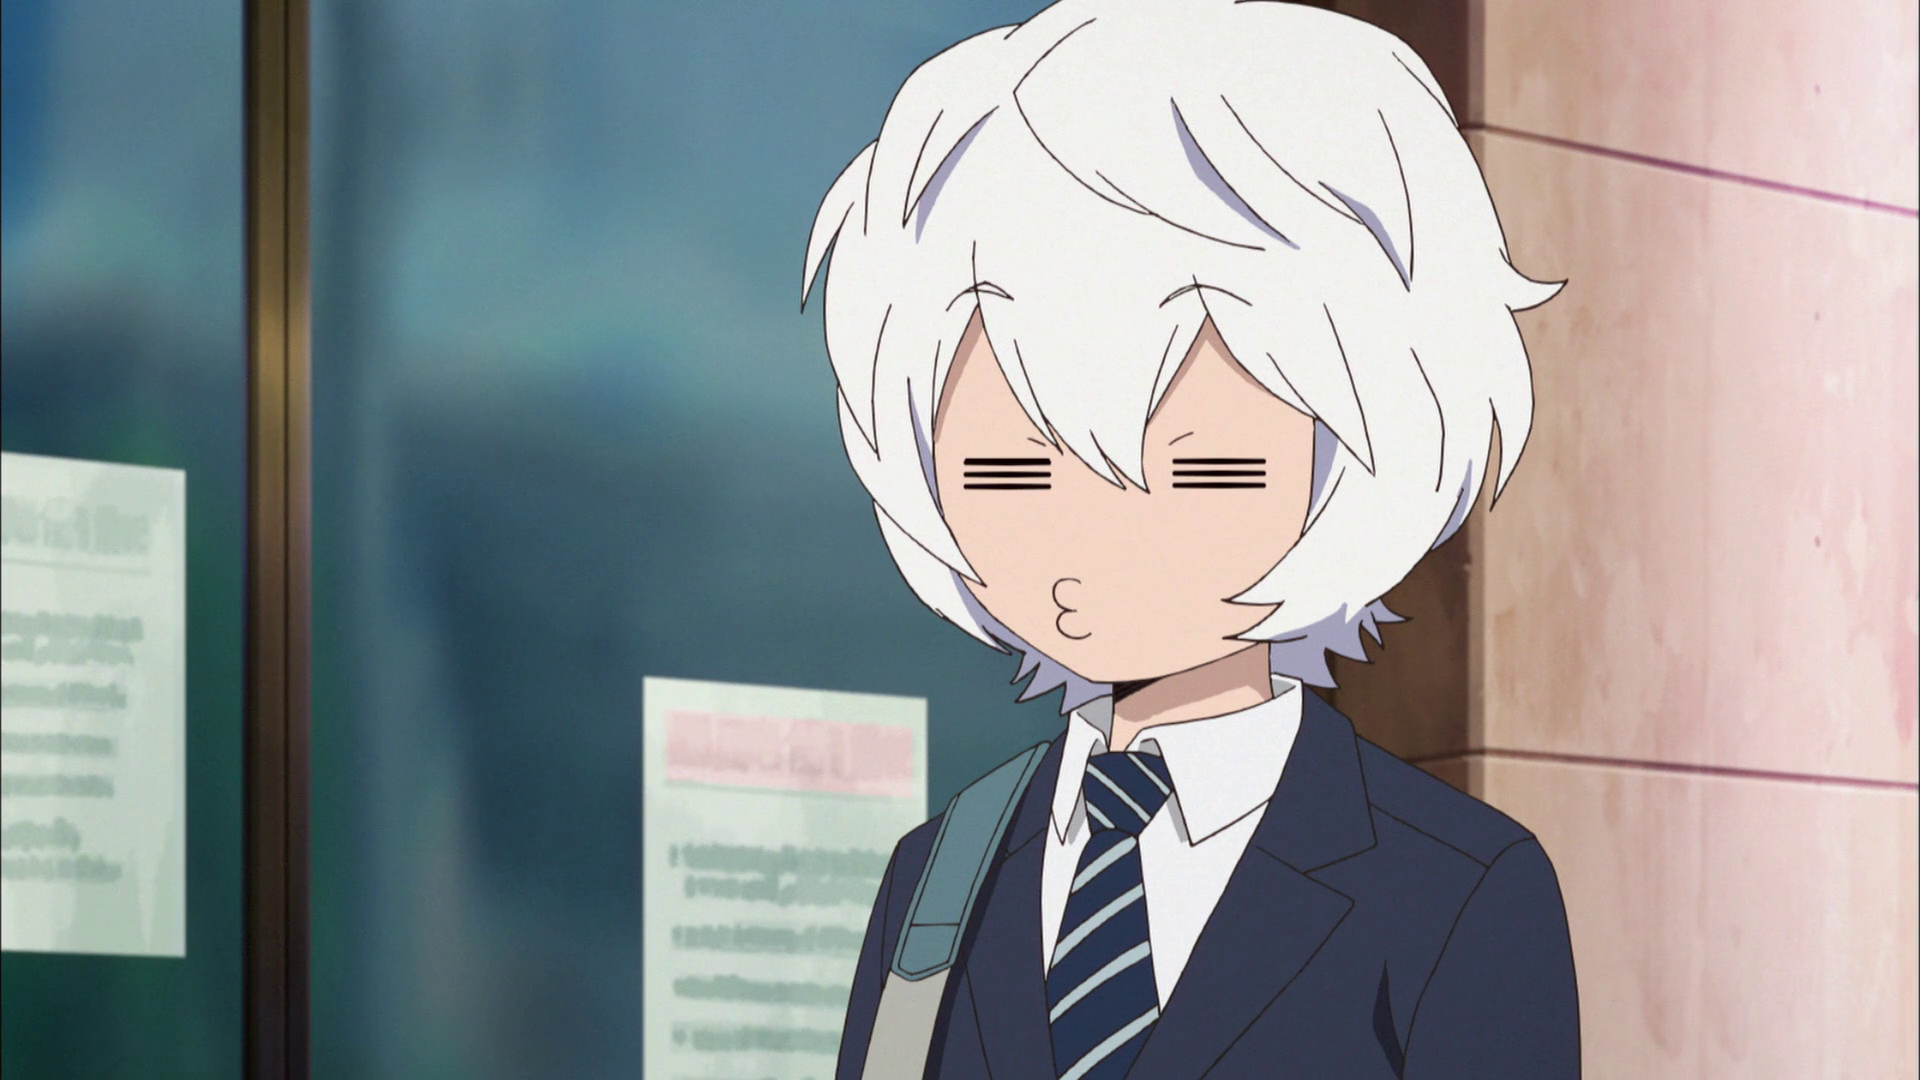 Anime] What is this facial expression?